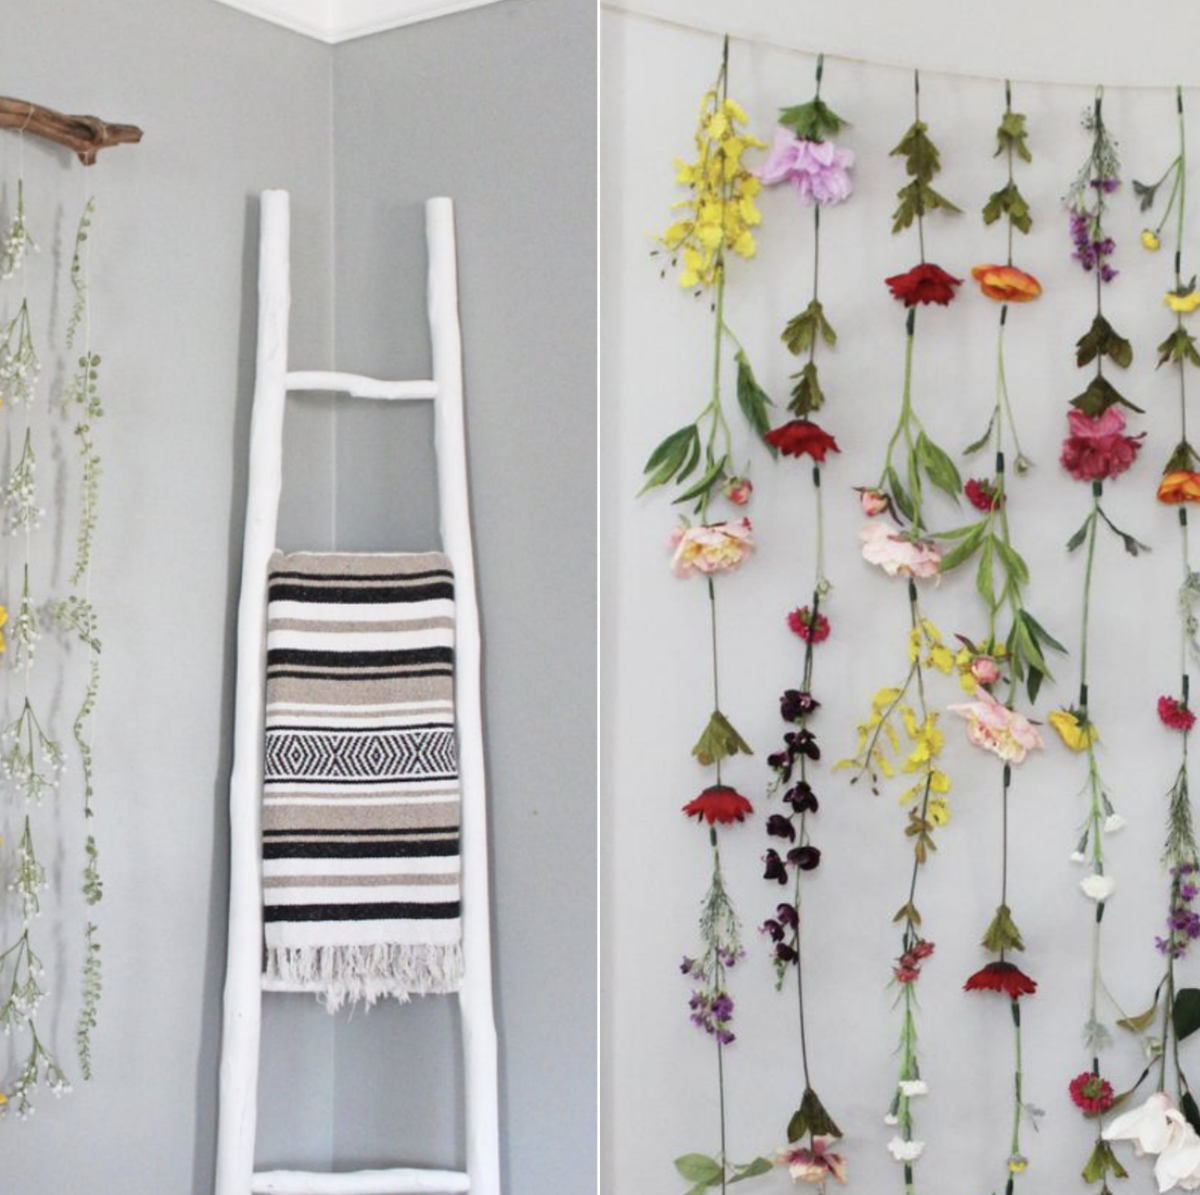 Flower Wall Garlands Are Trending on Pinterest, and You Can DIY Your Own